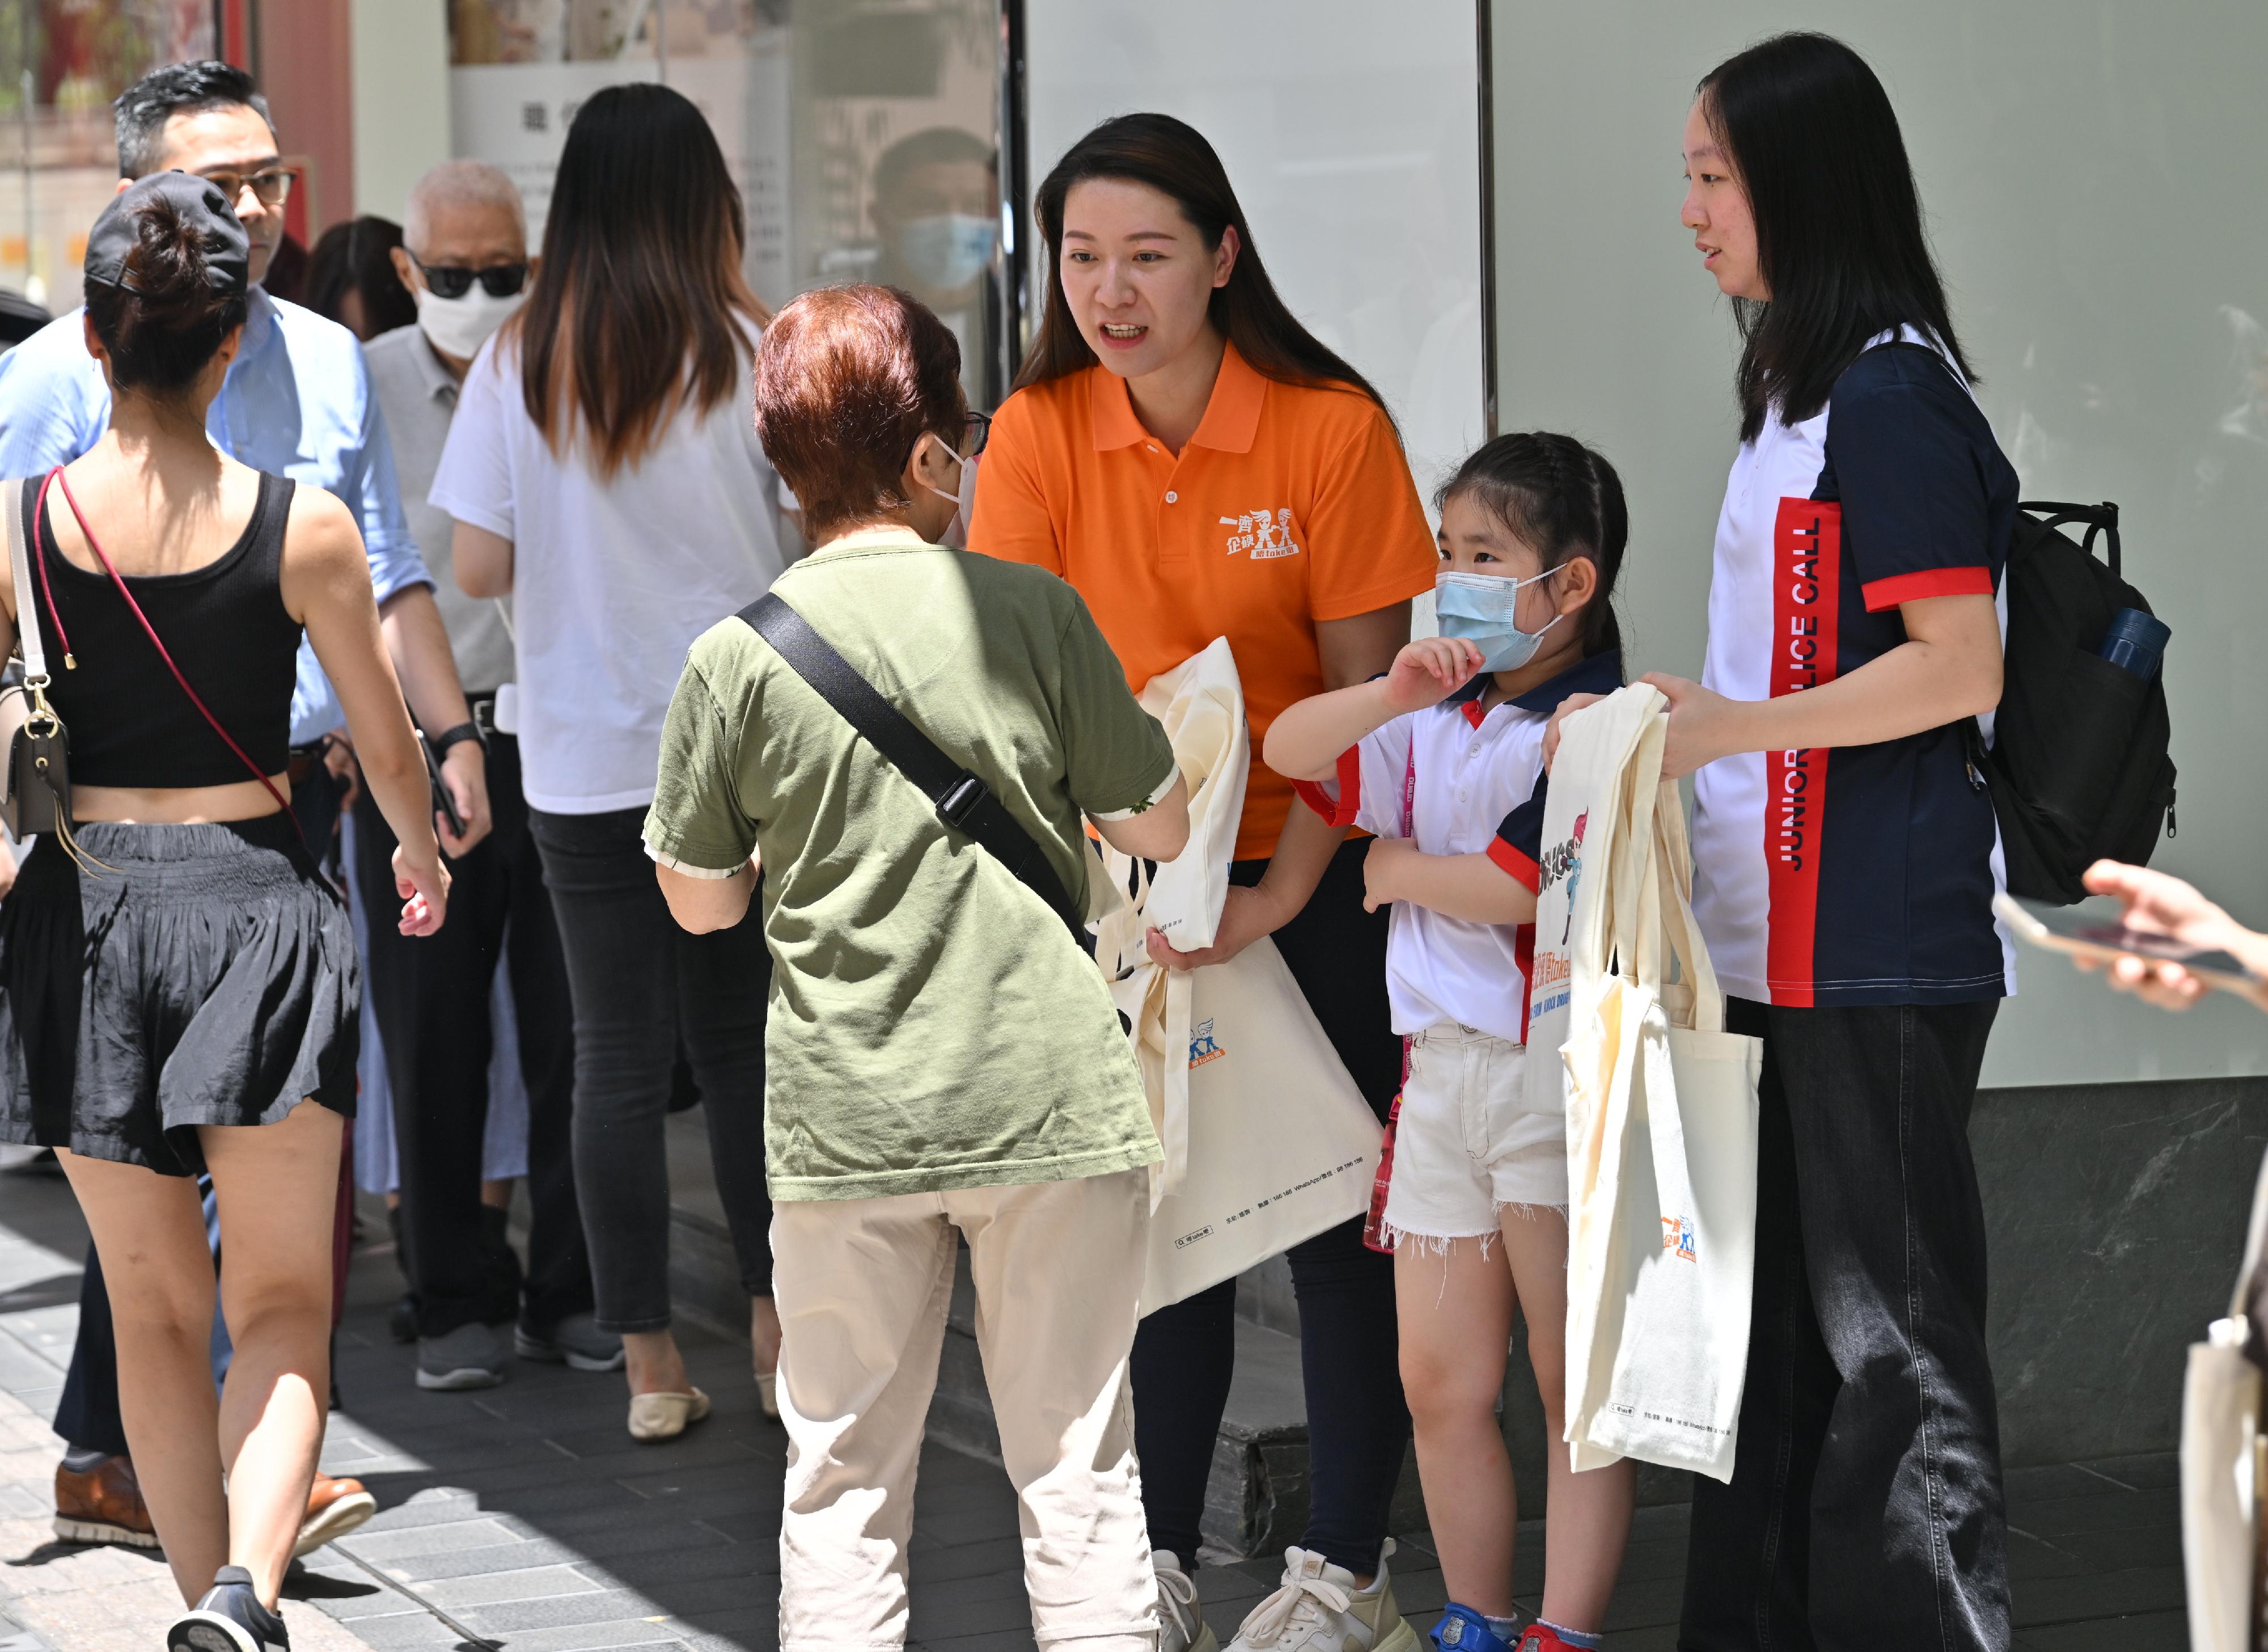 To echo the International Day against Drug Abuse and Illicit Trafficking, the Action Committee Against Narcotics held a preventive education and publicity event today (June 26) to unite different sectors of the community in the fight against drugs. Photo shows members of the Junior Police Call (first right and second right) distributing anti-drug leaflets and publicity items to members of the public, reminding them to firmly say no to drugs. 